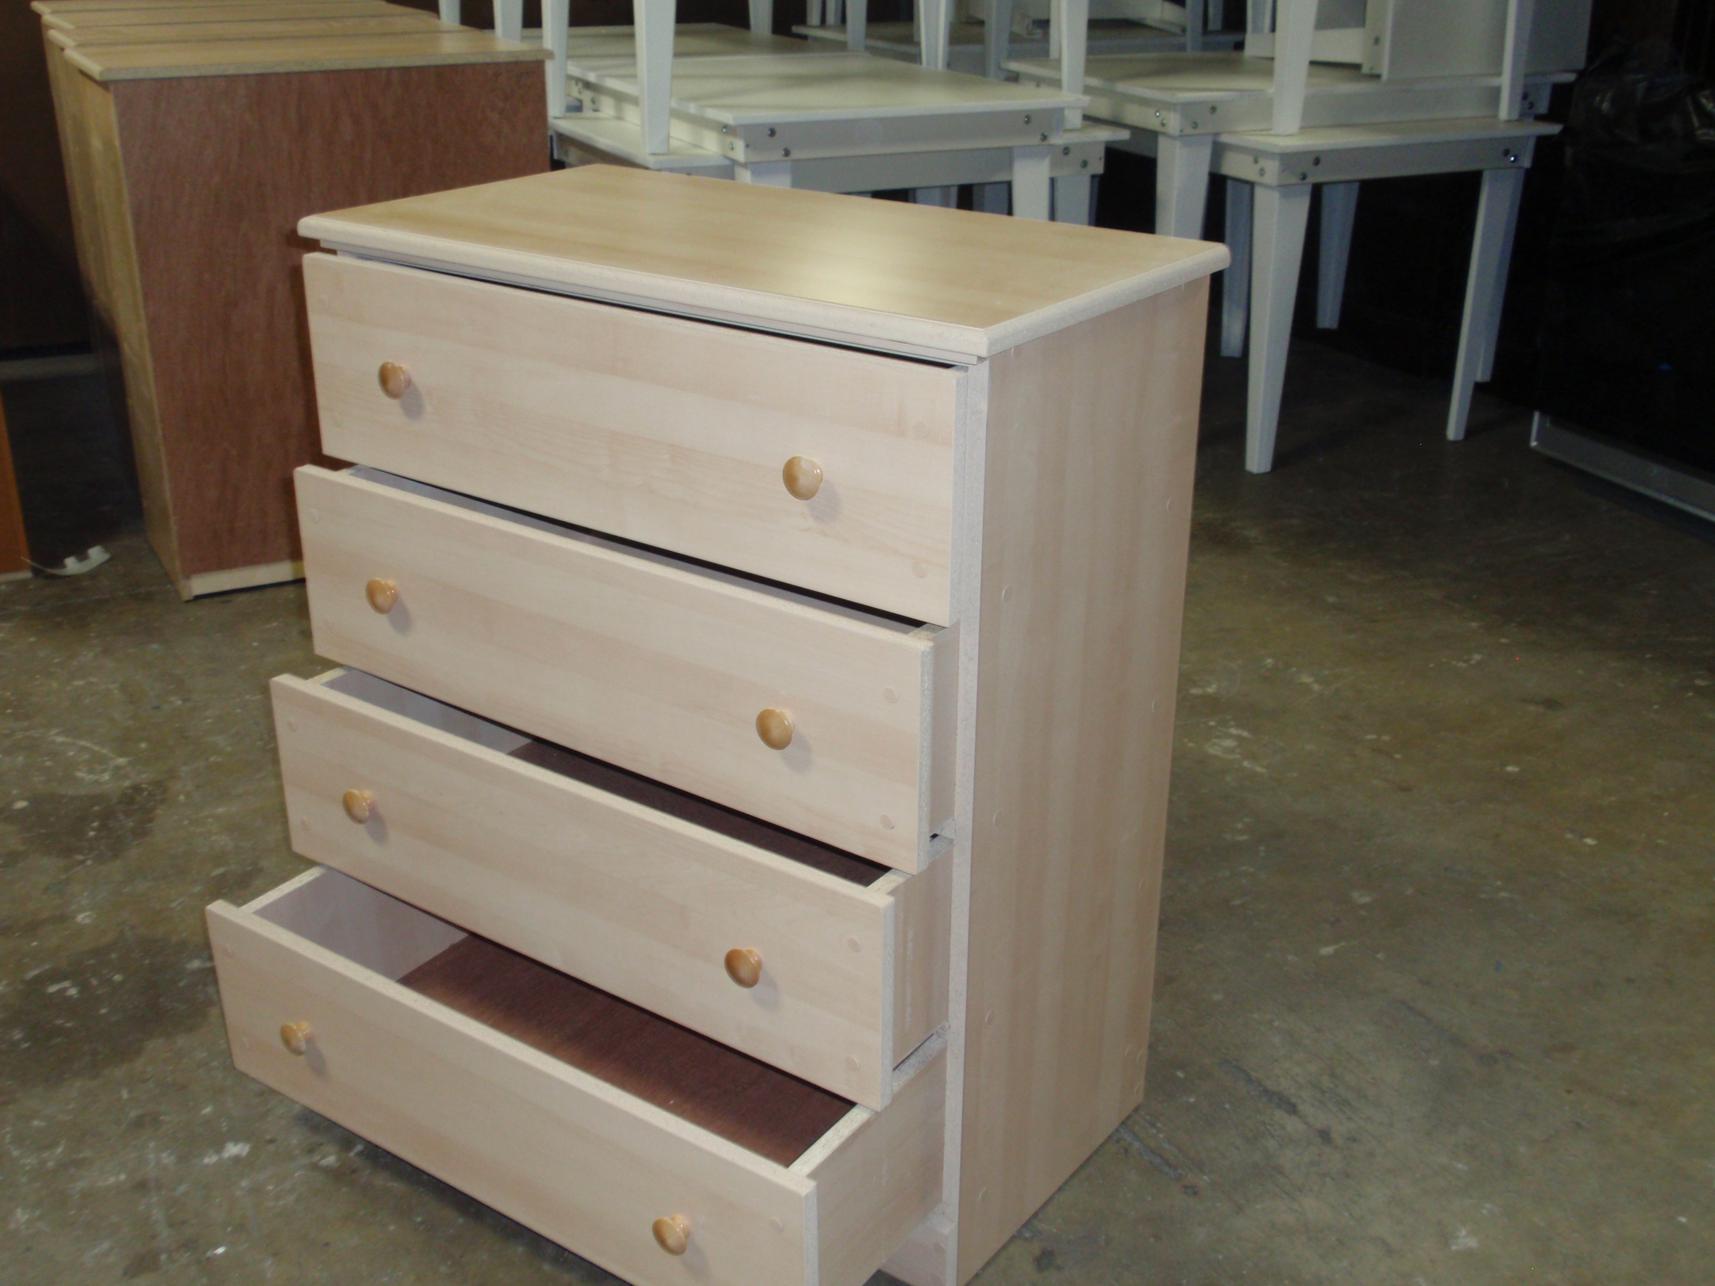 Building Dressers and Bedframes for Families in Need